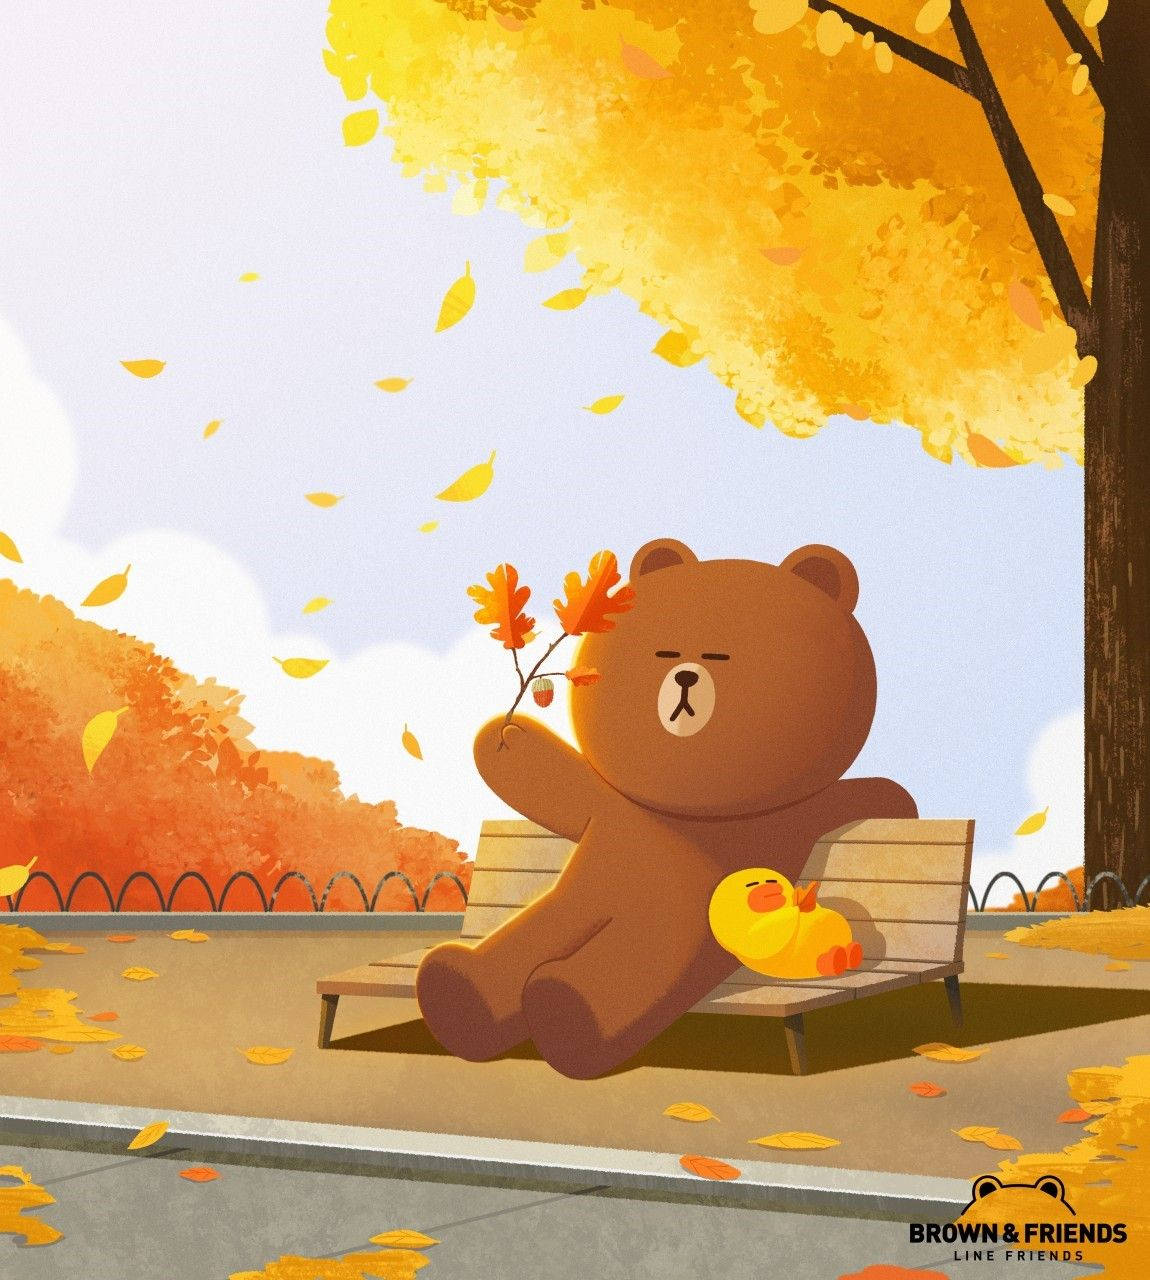 Take a leaf-peeping walk with Brown and Sally, your favorite Line Friends! Wallpaper